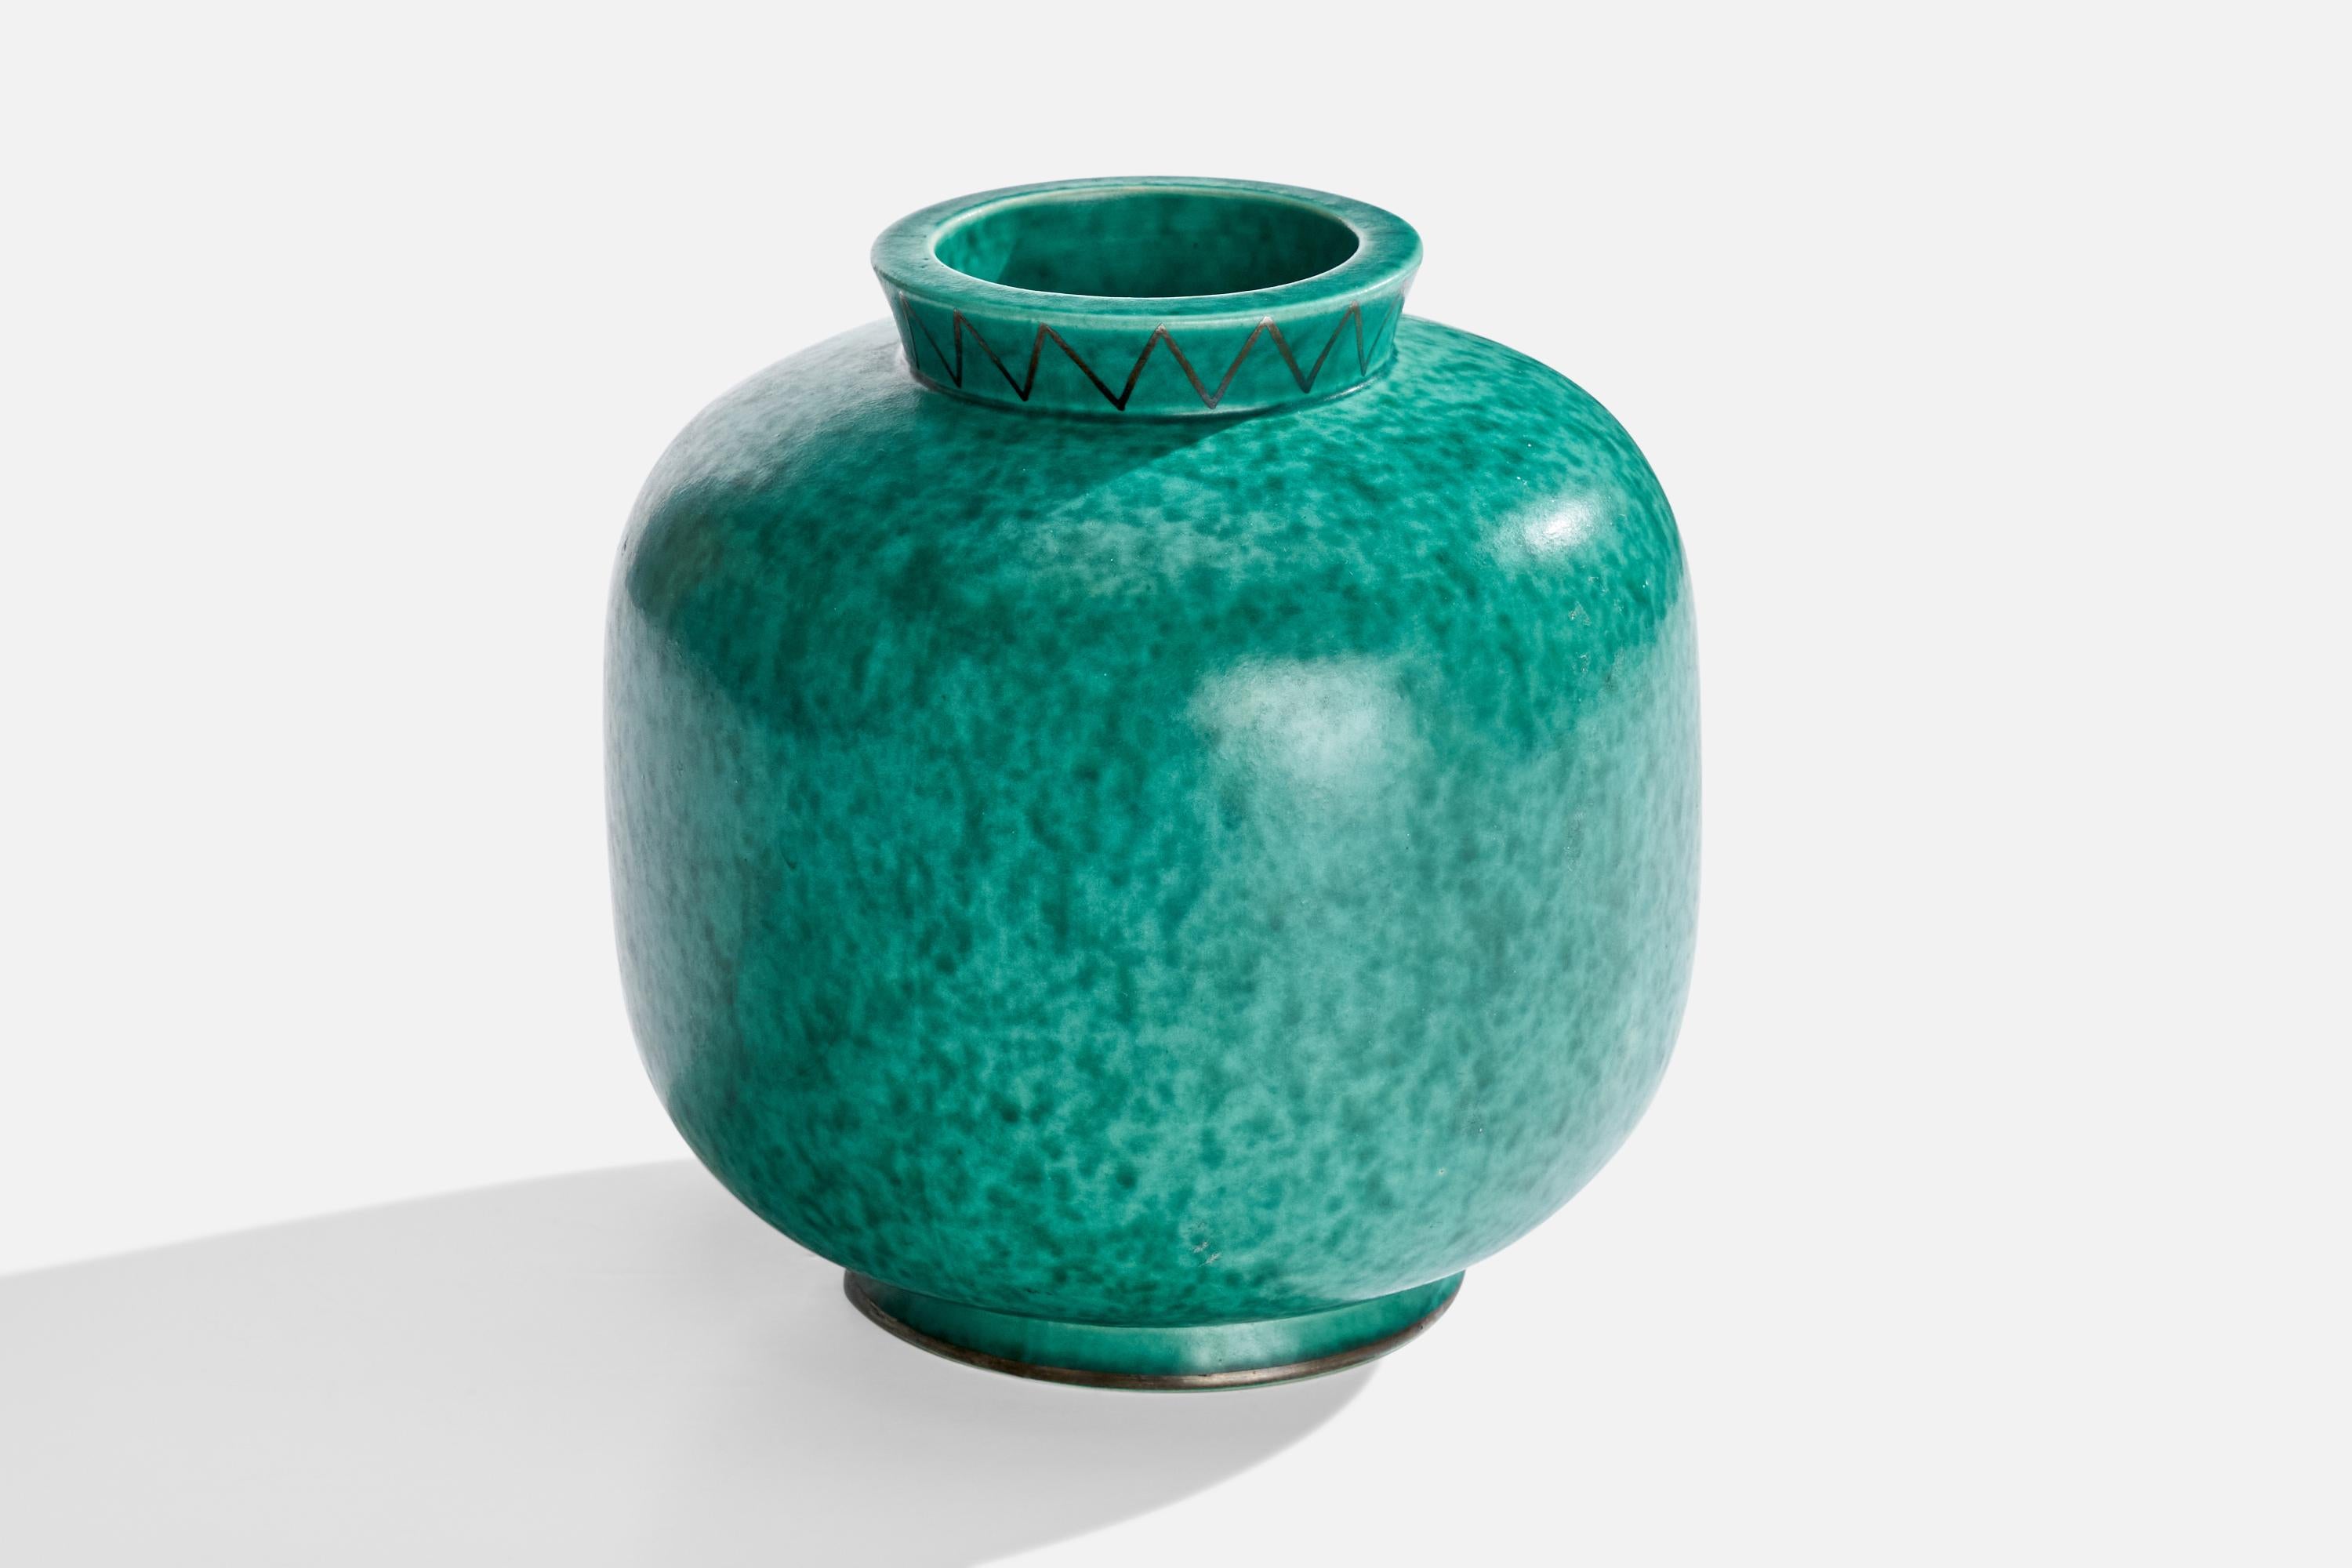 A green-glazed stoneware vase with silver paint designed by Wilhelm Kåge and produced by Gustavsberg, Sweden, c. 1950s.